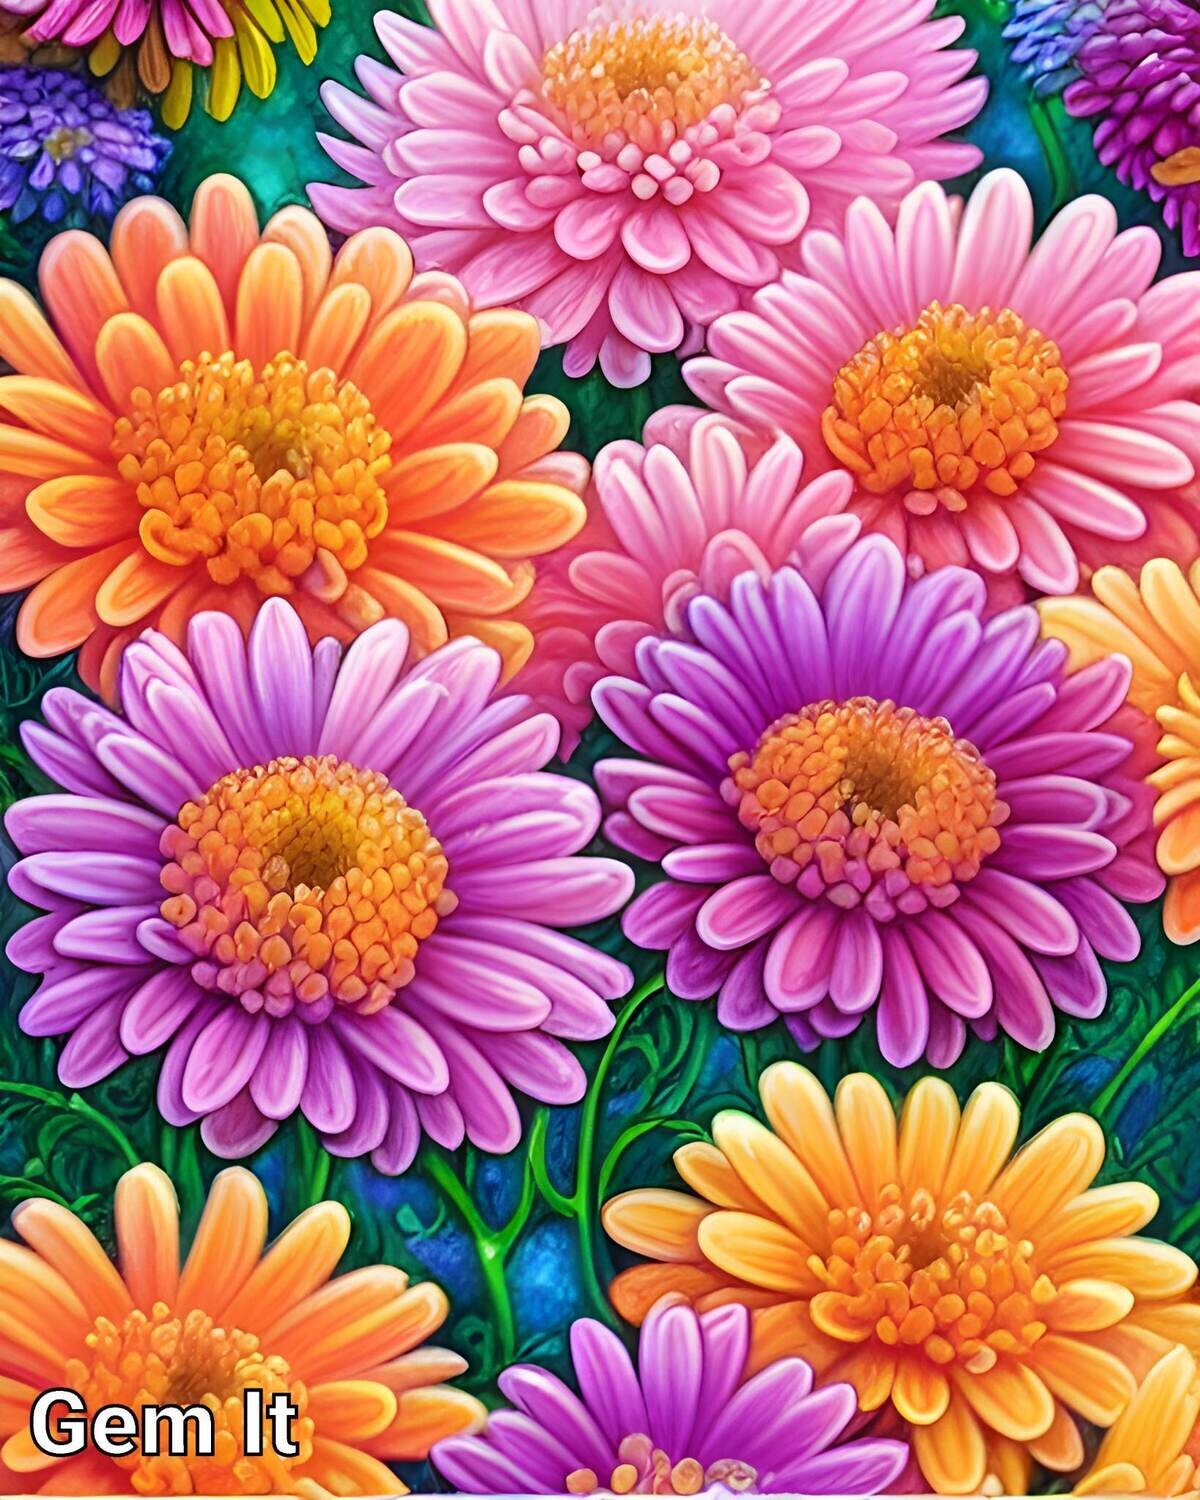 Chrysanthemums C - Specially ordered for you. Delivery is approximately 4 - 6 weeks.